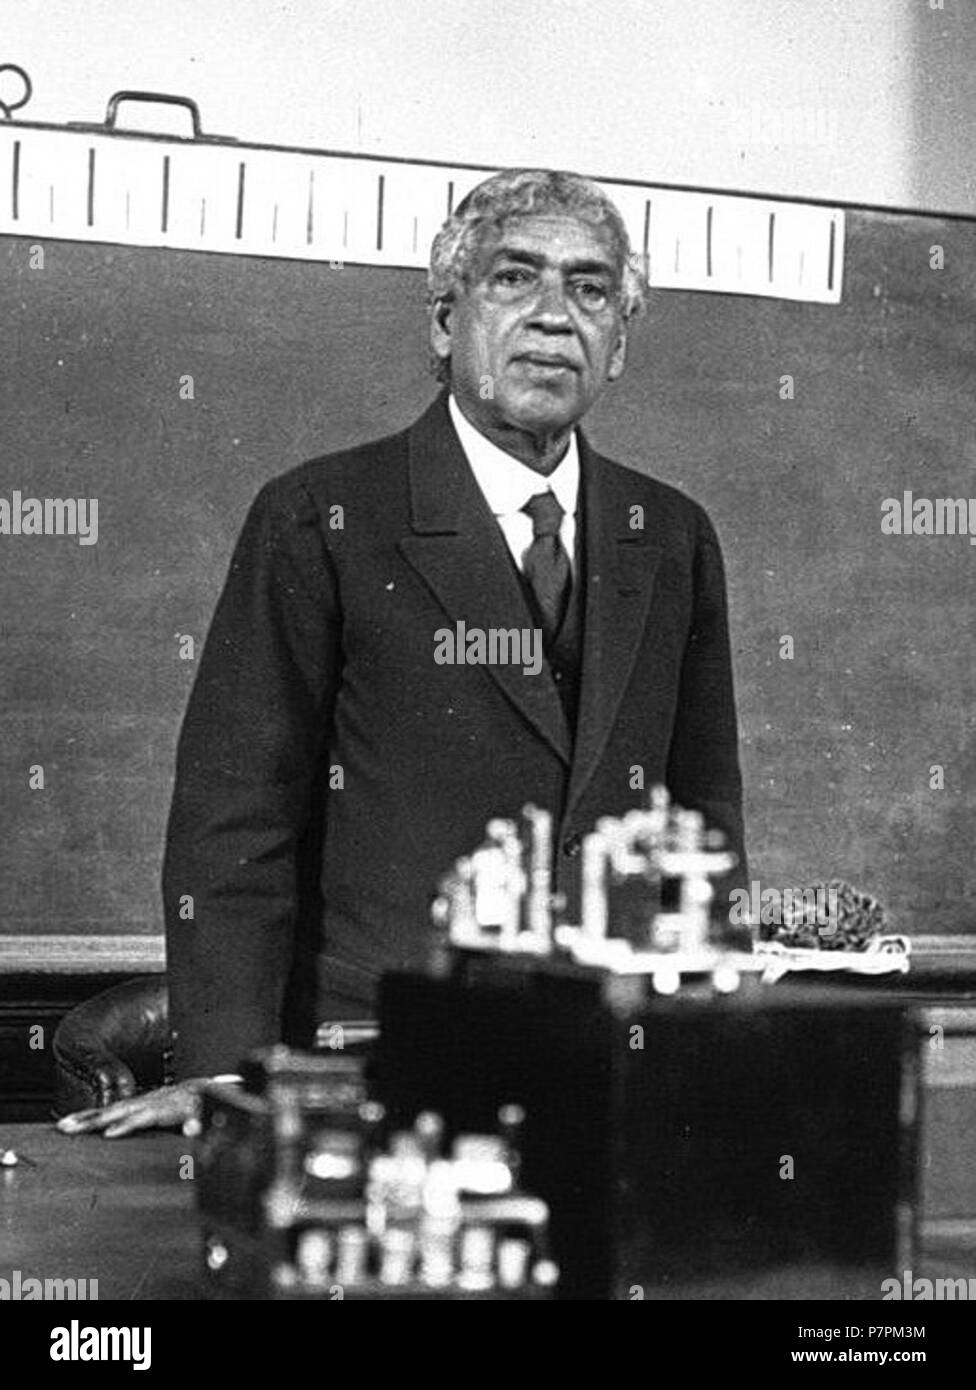 English: Bengali scientist Jagadish Chandra Bose (1858-1937) lecturing on  the 'nervous system' of plants at the Sorbonne in Paris in 1926. Français :  Le savant bengali Jagadish Chandra Bose (1858-1937) démontrant l'existence